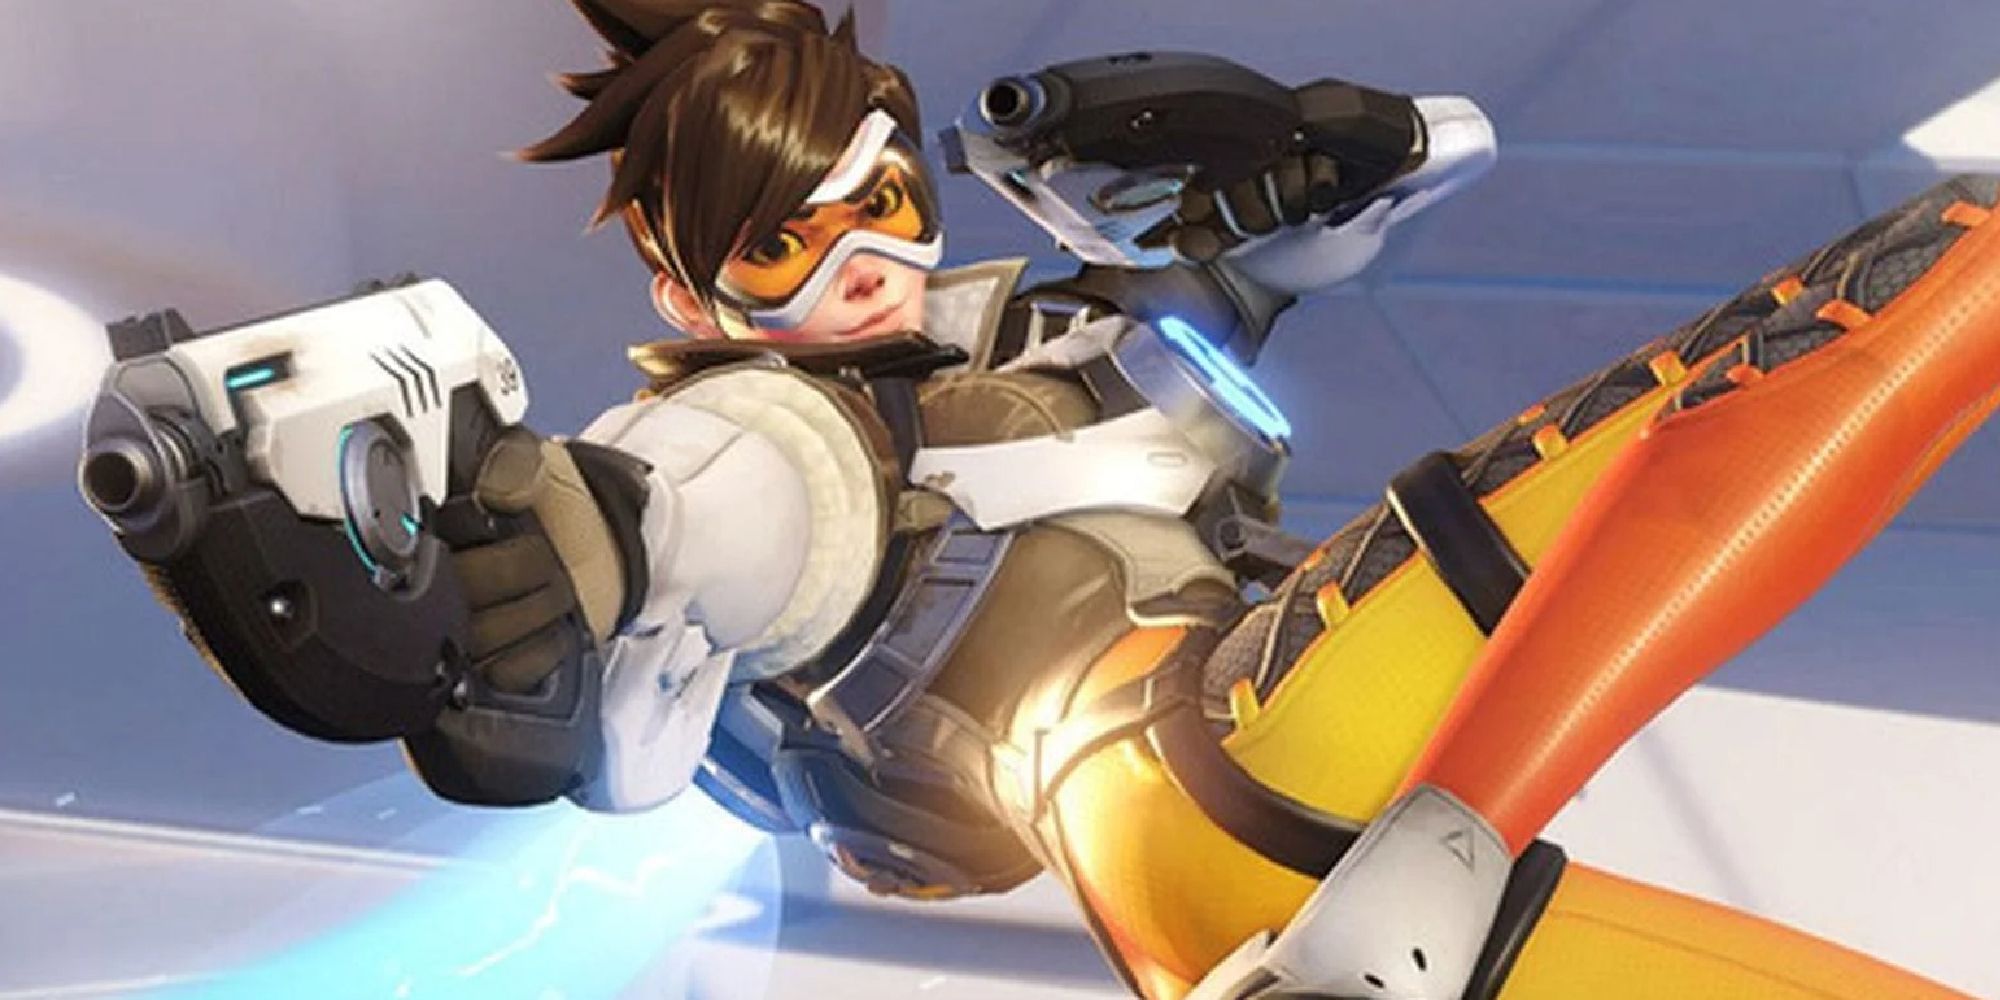 Tracer appearing in her outfit from Overwatch 1